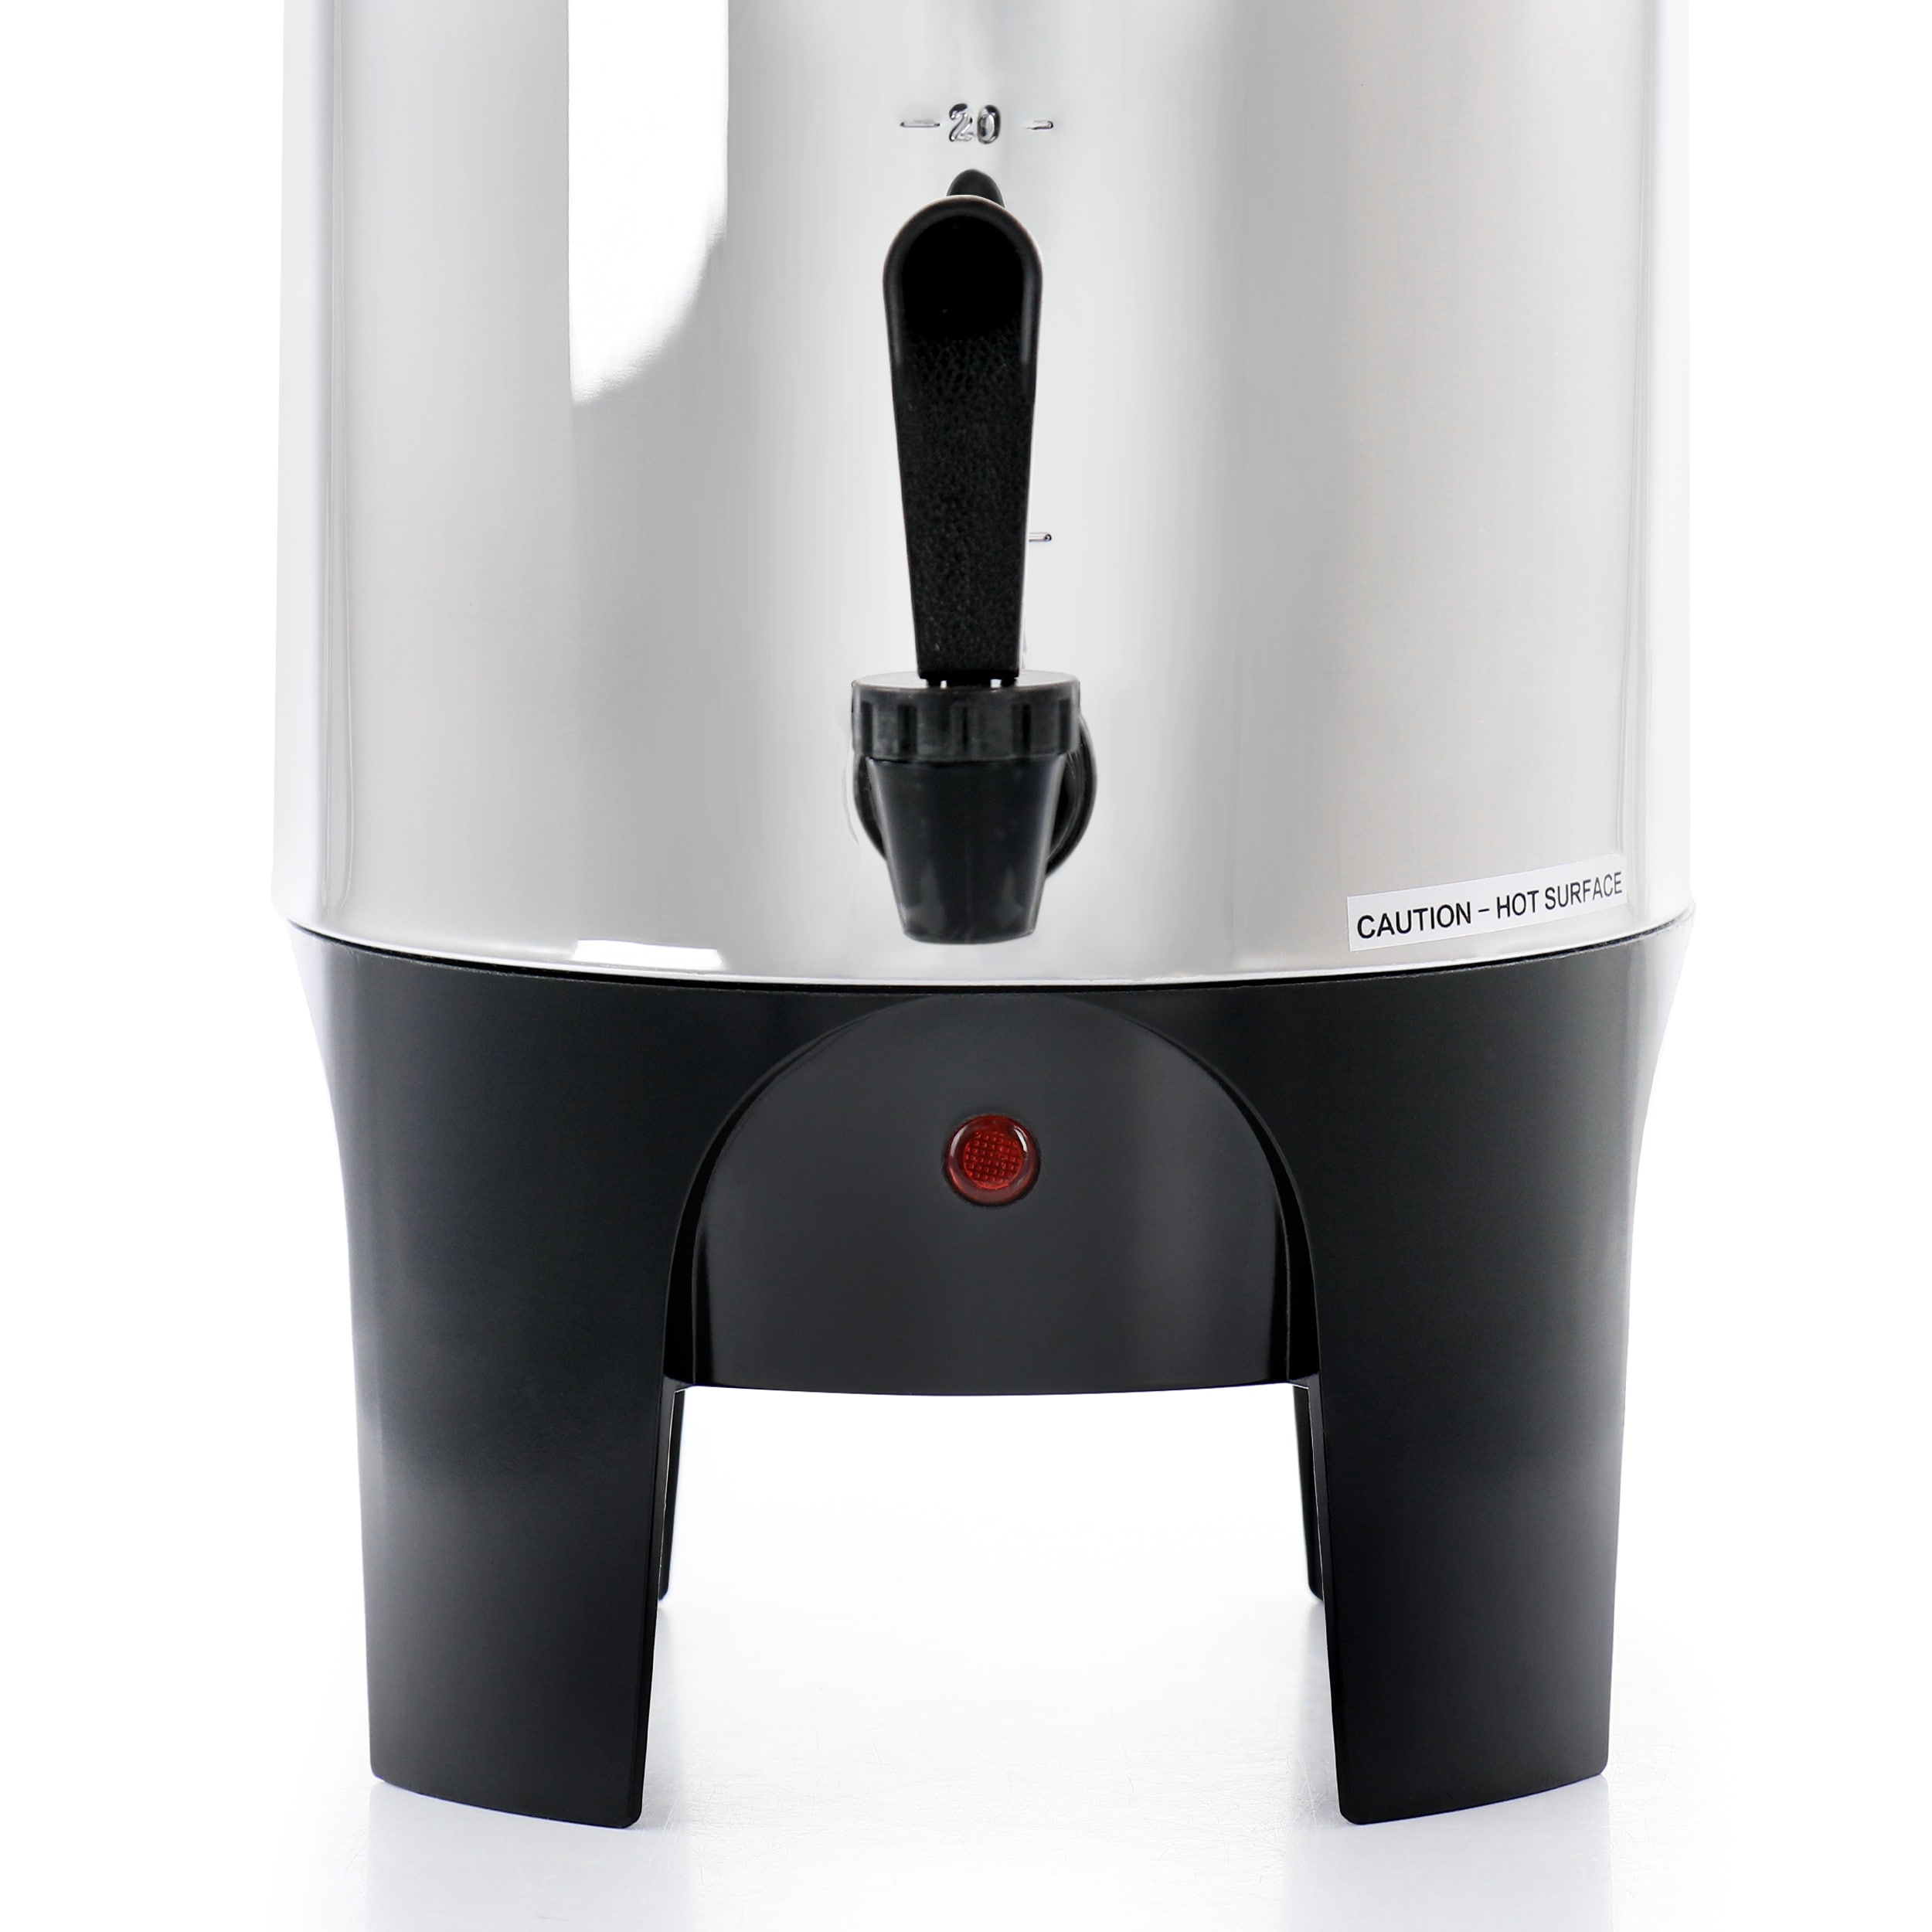 30 Cup Coffee Maker 